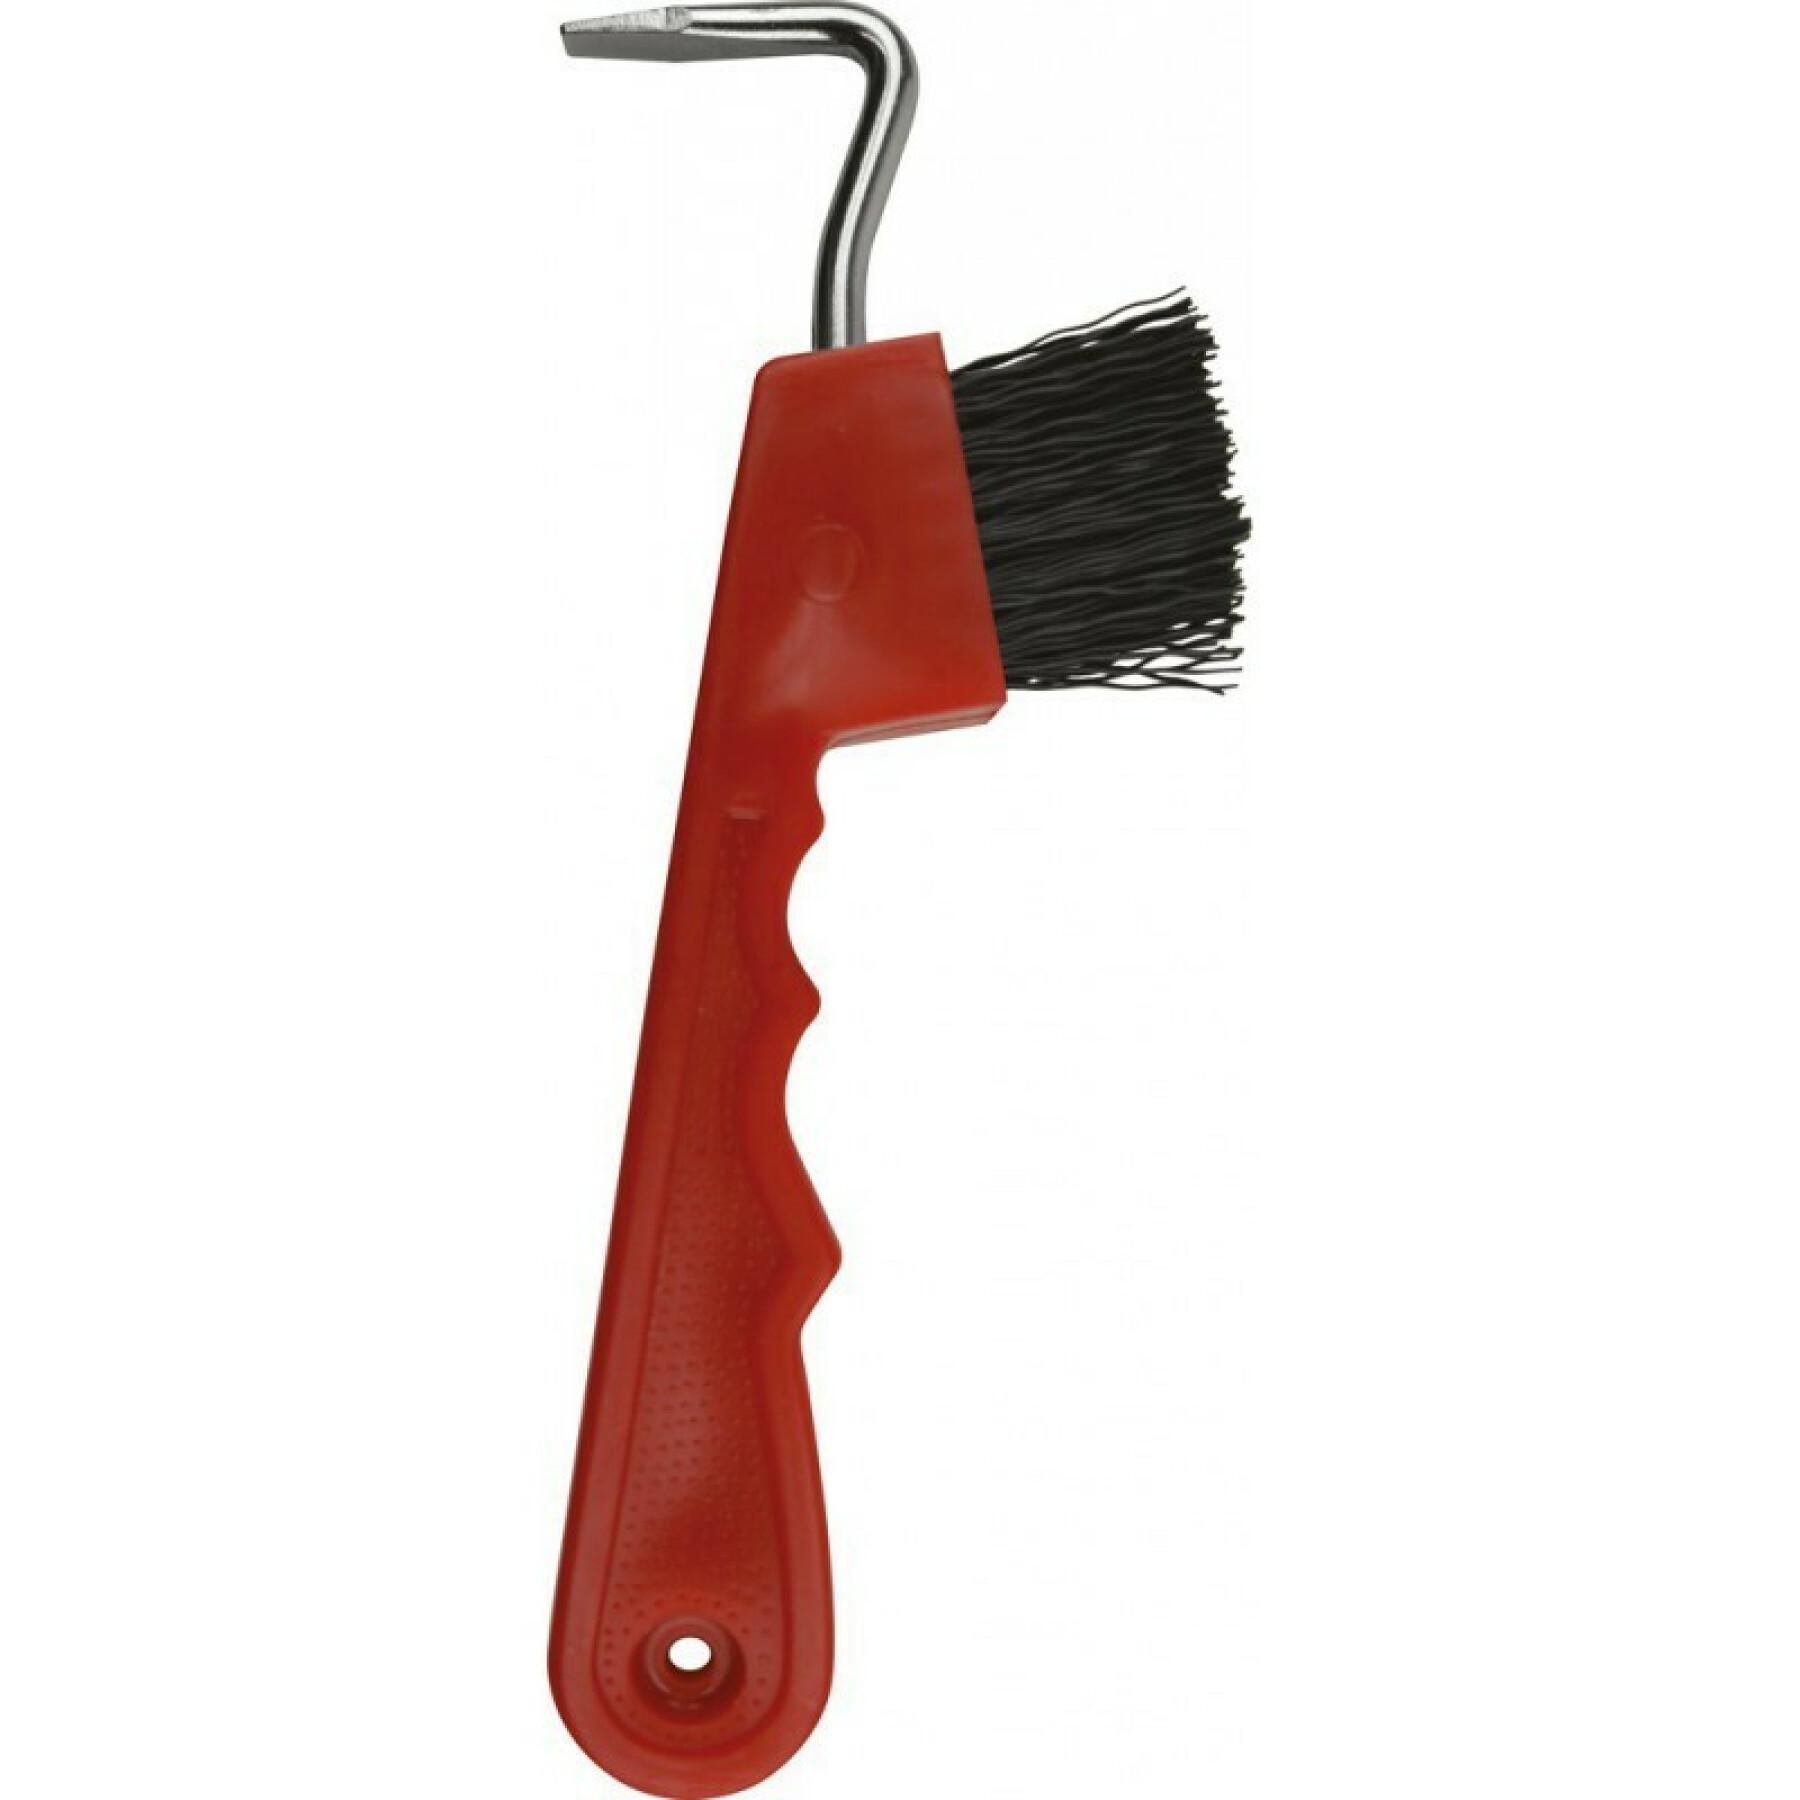 Cure-pied pour cheval brosse Hippotonic